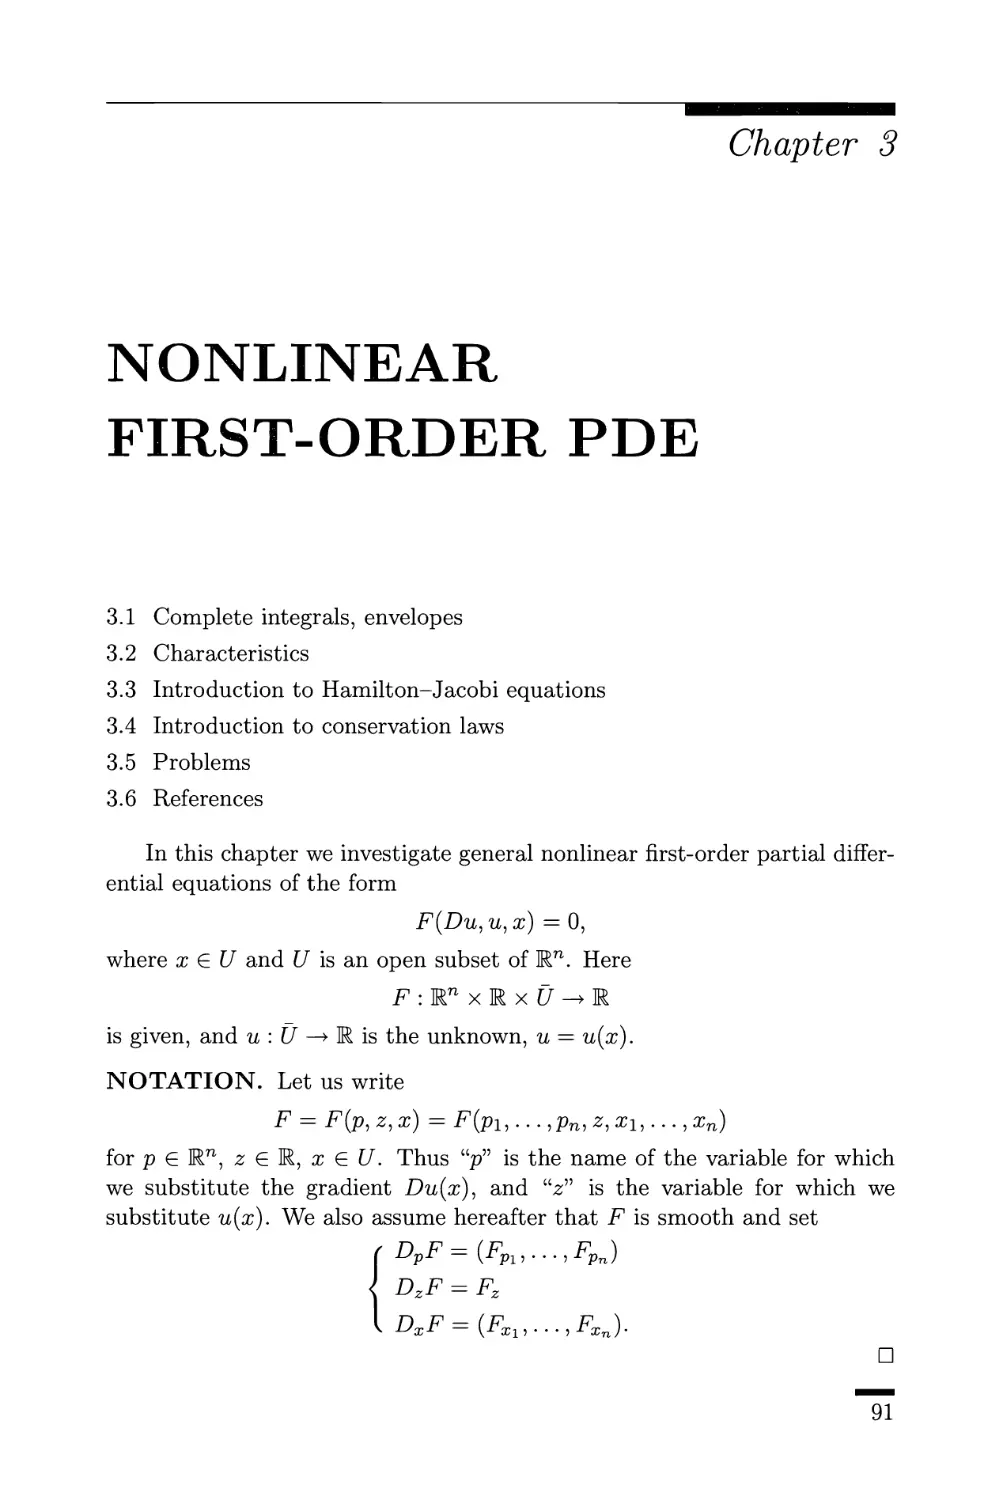 3. Nonlinear First-Order PDE